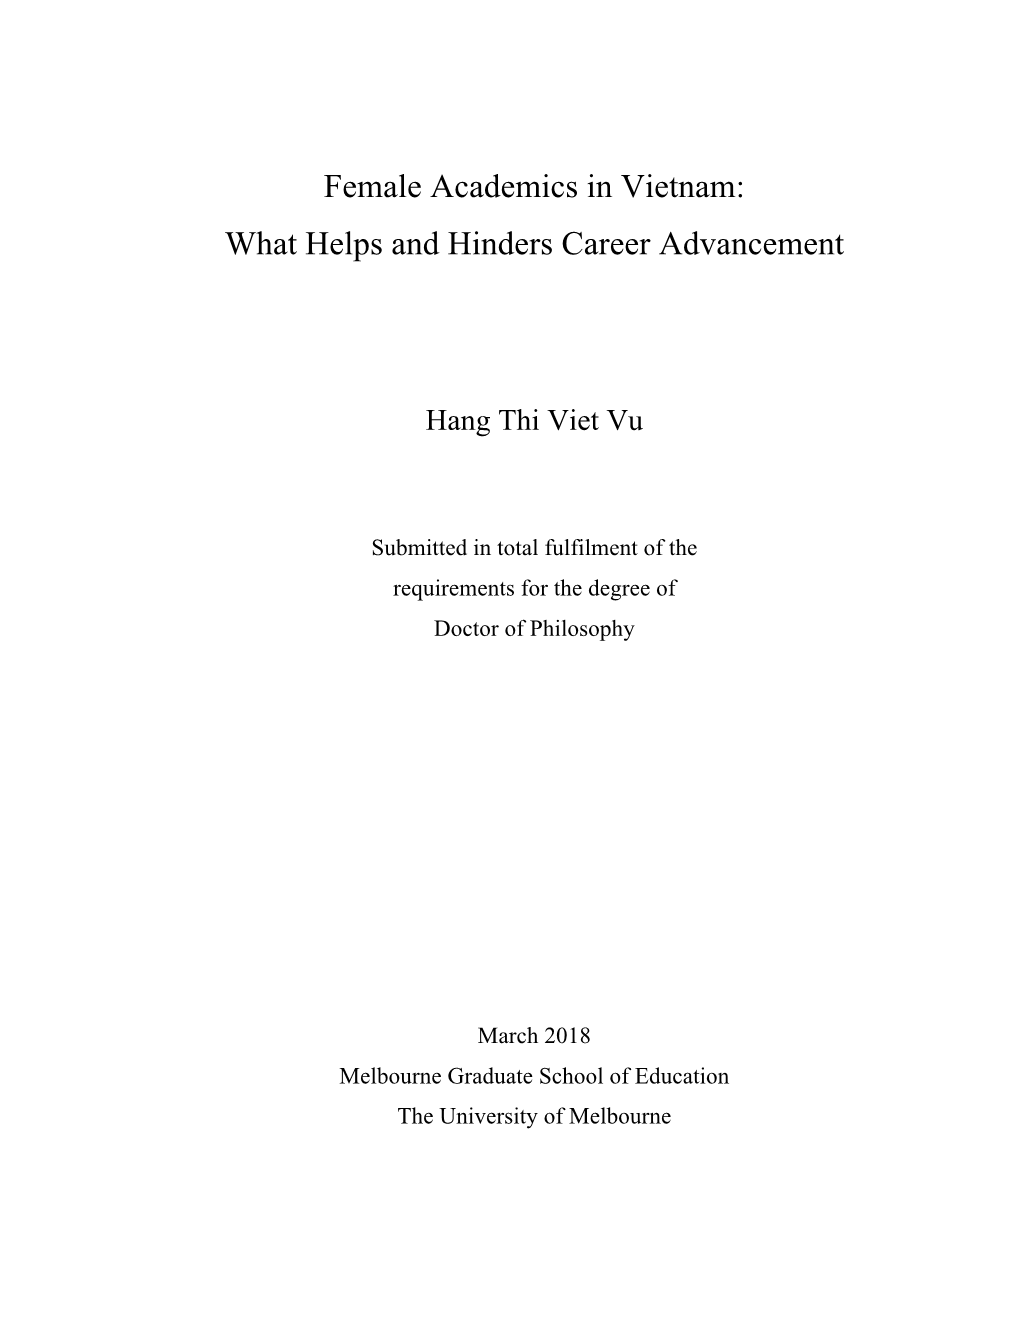 Female Academics in Vietnam: What Helps and Hinders Career Advancement